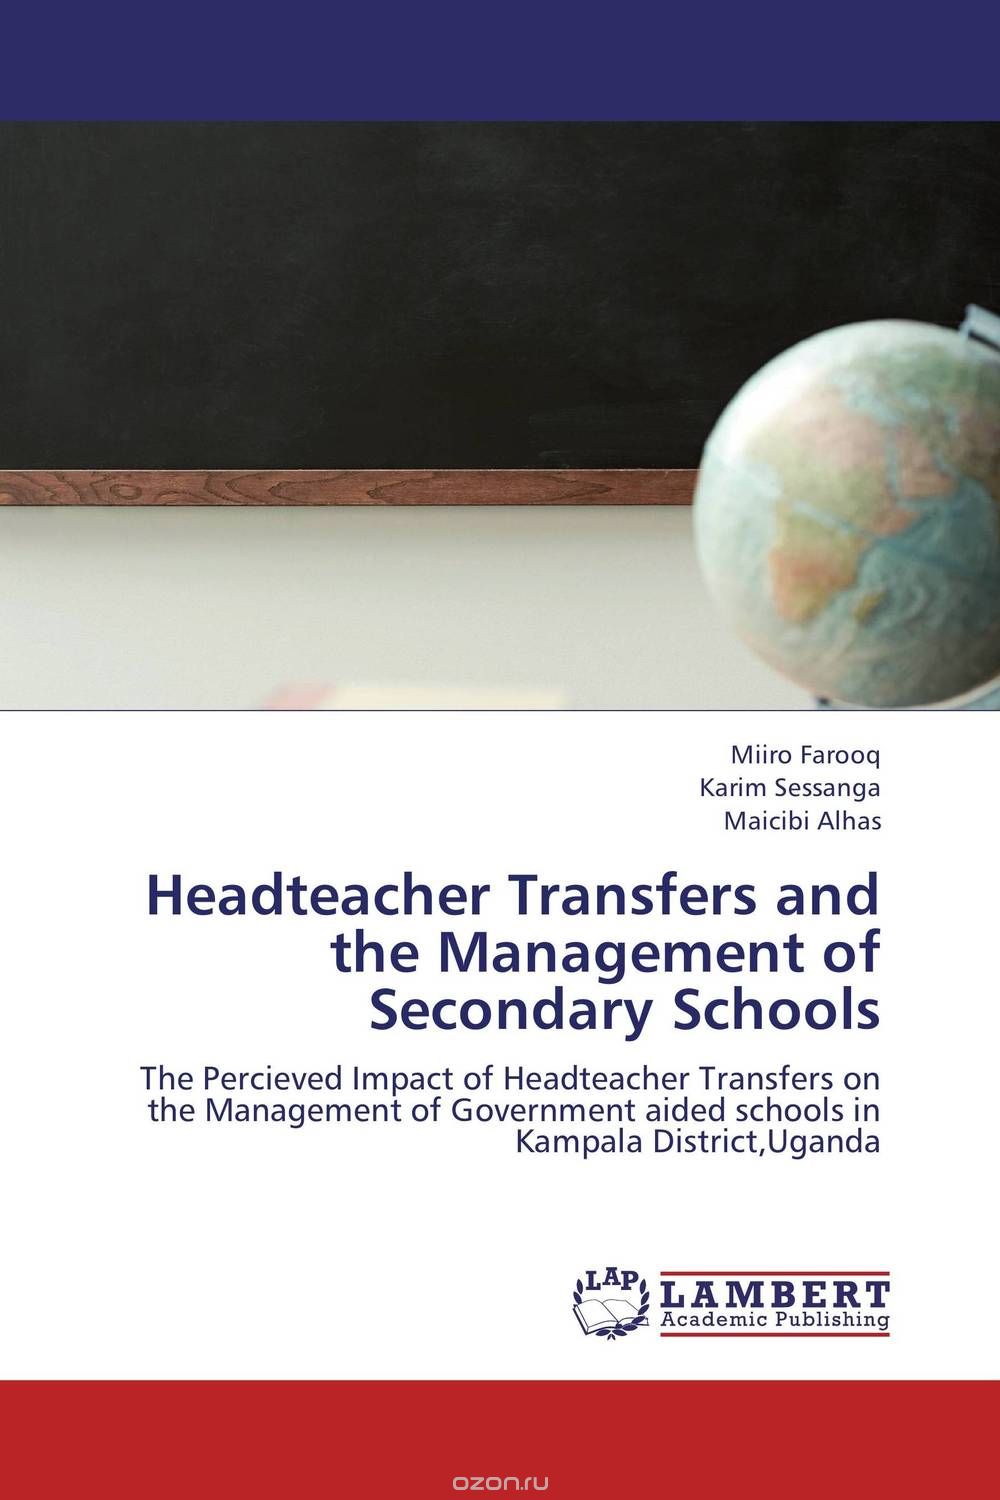 Headteacher Transfers and the Management of Secondary Schools